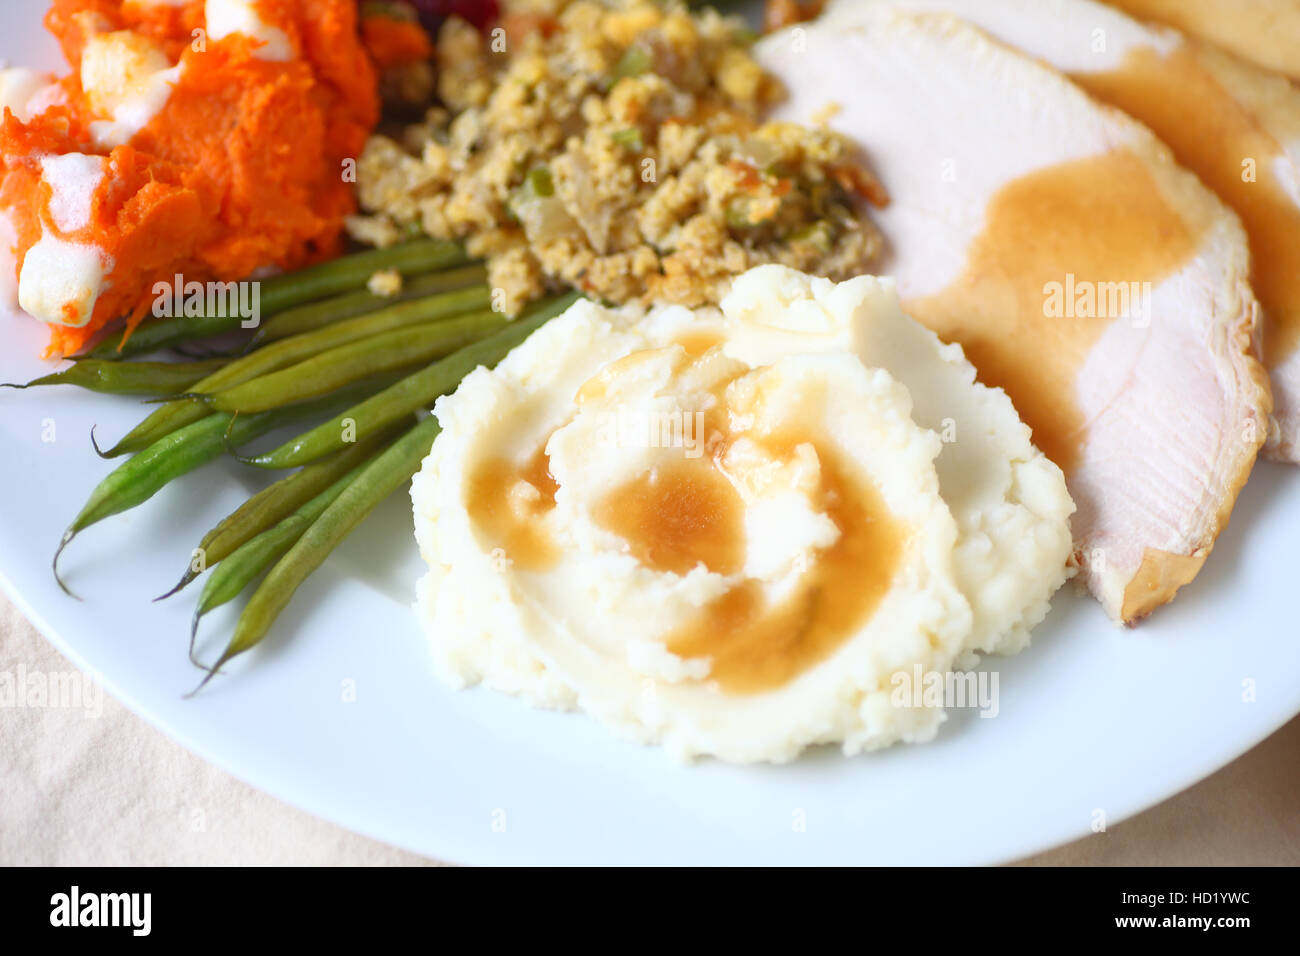 Thanksgiving meal with turkey, mashed potatoes, stuffing, green beans and yams with marshmallows and gravy Stock Photo